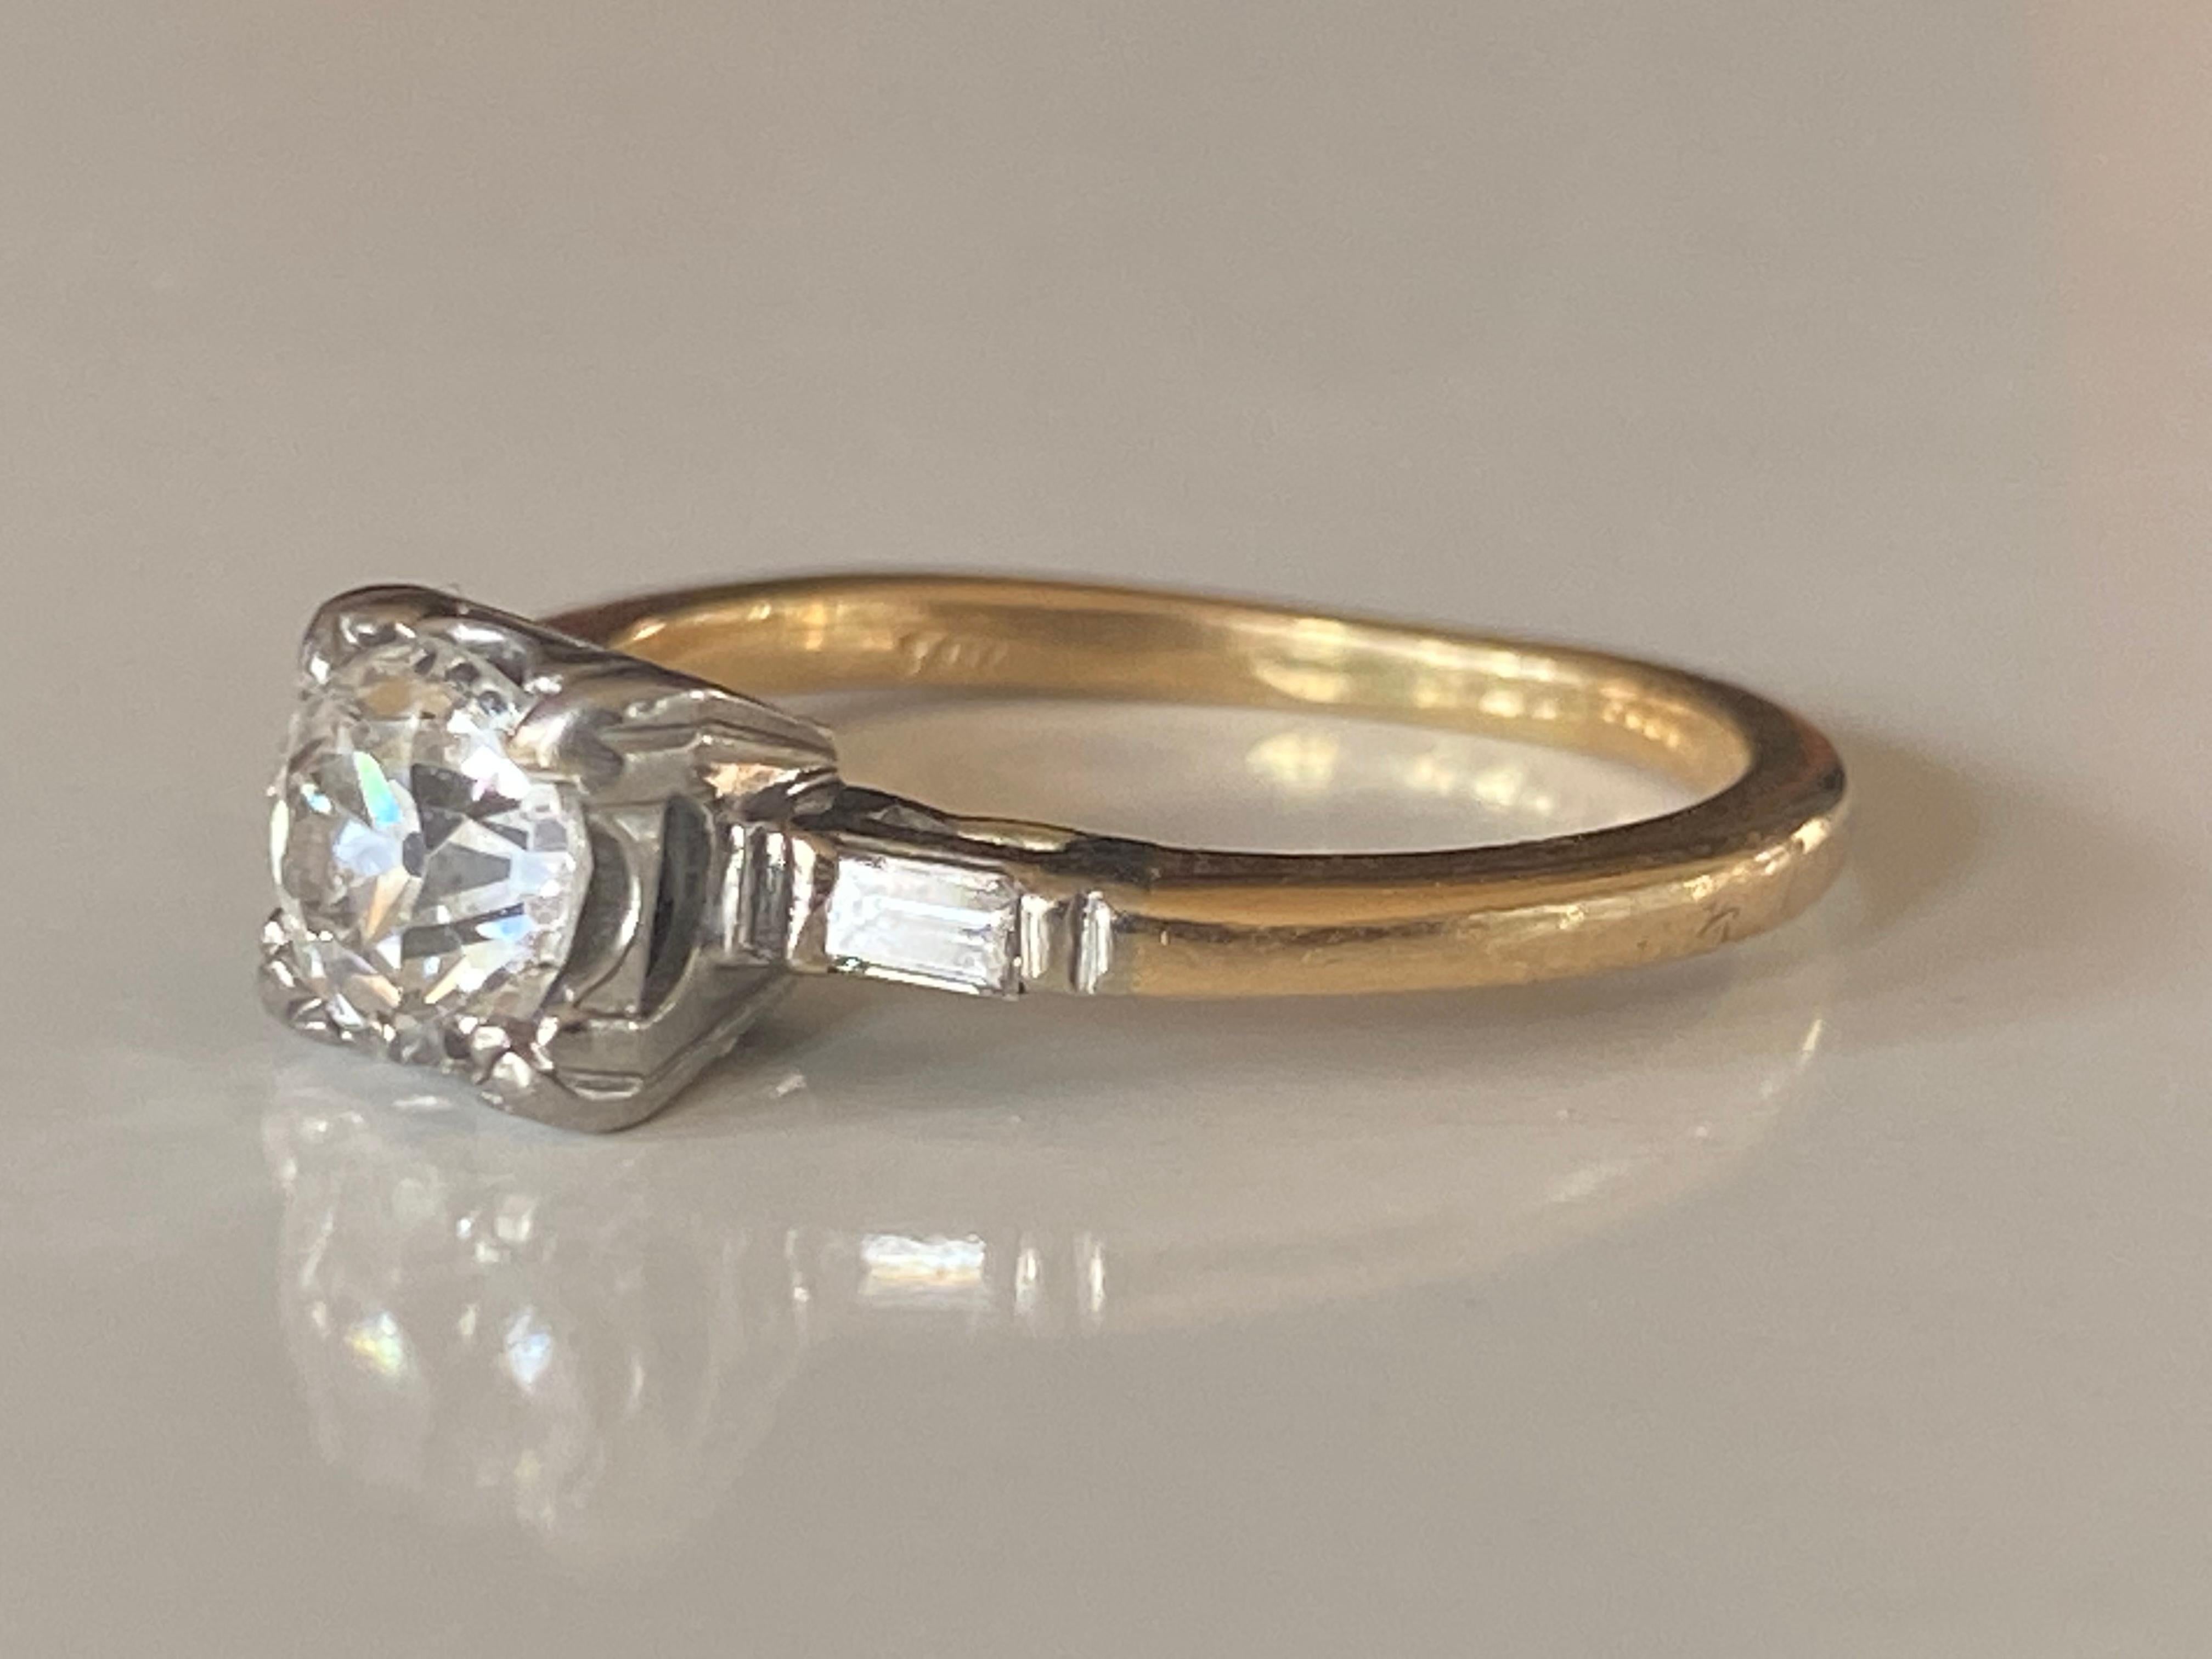 This stunning two-tone ring set in 14kt yellow and white gold is designed around an Old European cut diamond center stone measuring approximately 1.00 carat, G color, SI2 clarity and complemented by two baguette diamond side stones totaling